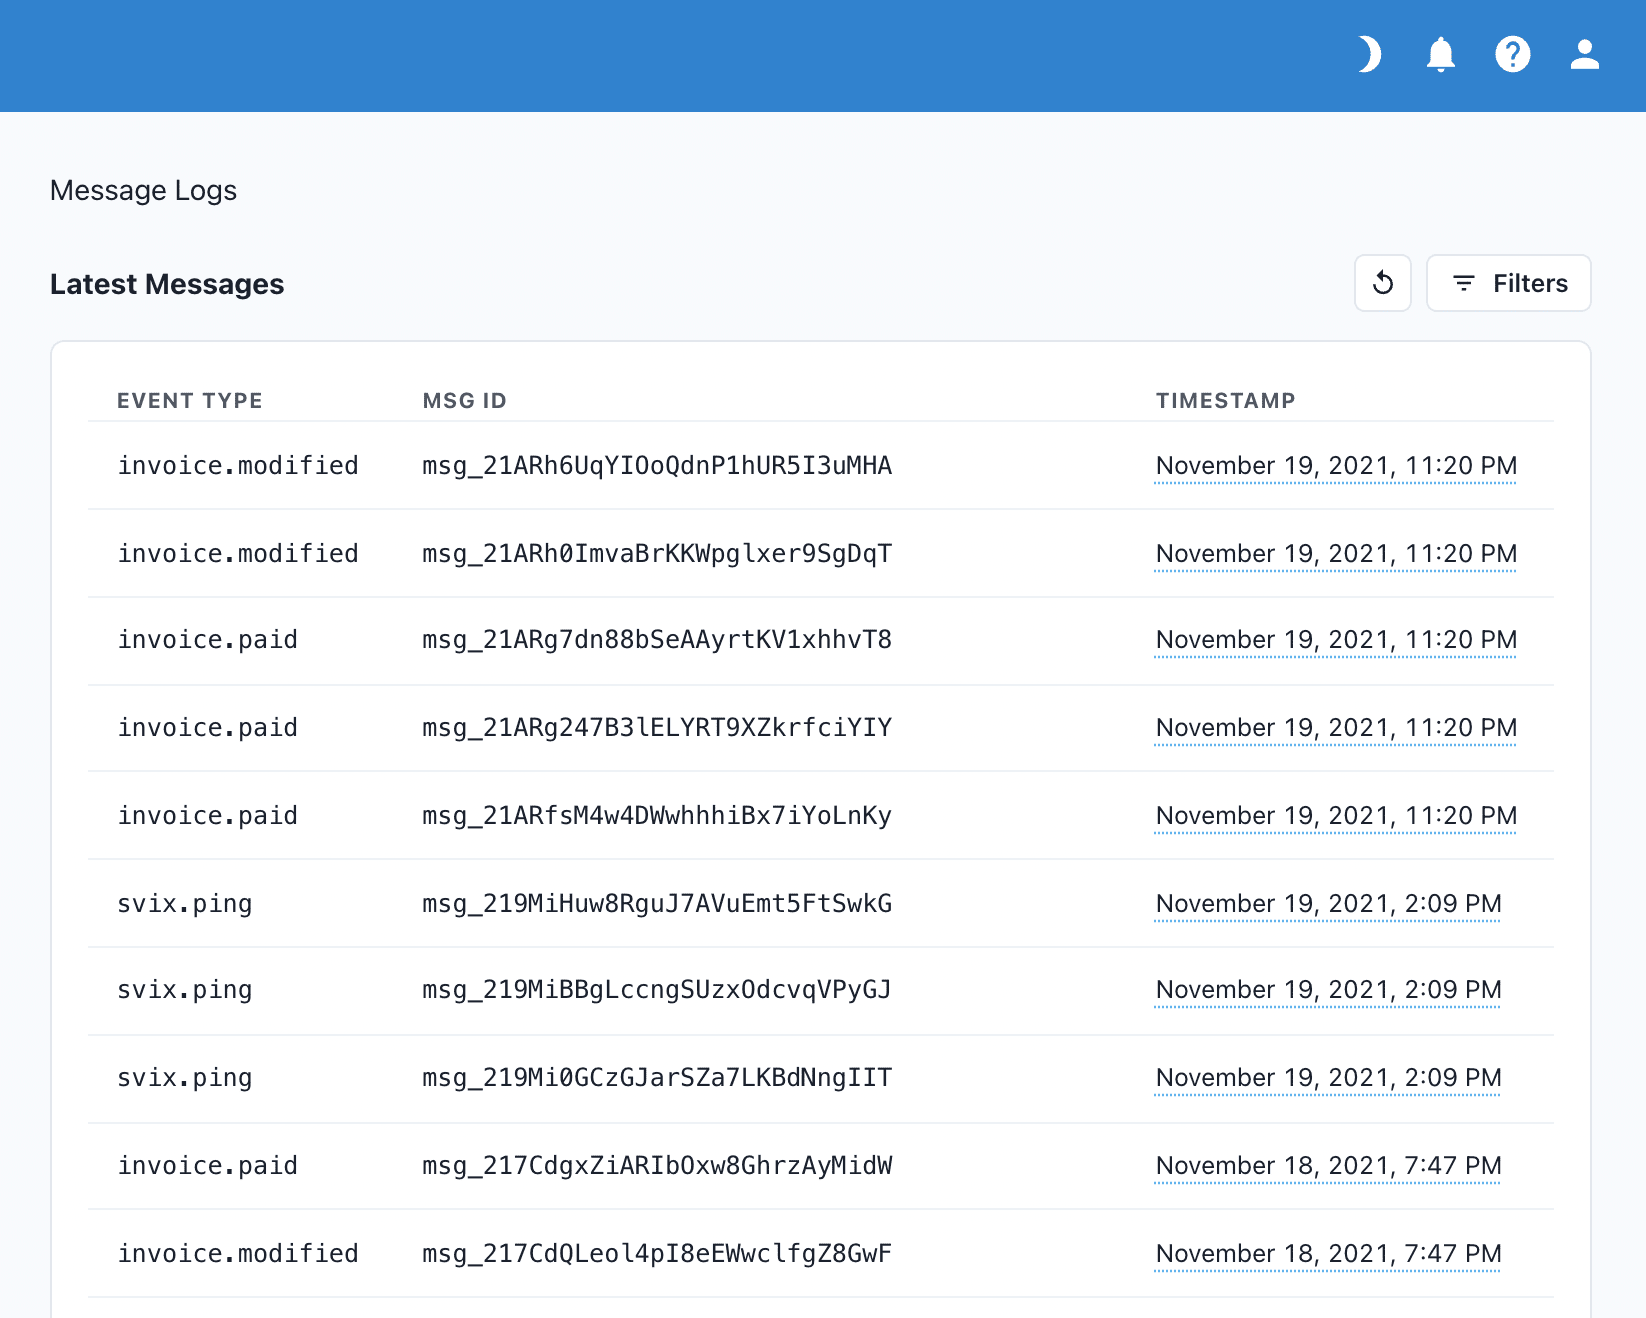 unfiltered message logs